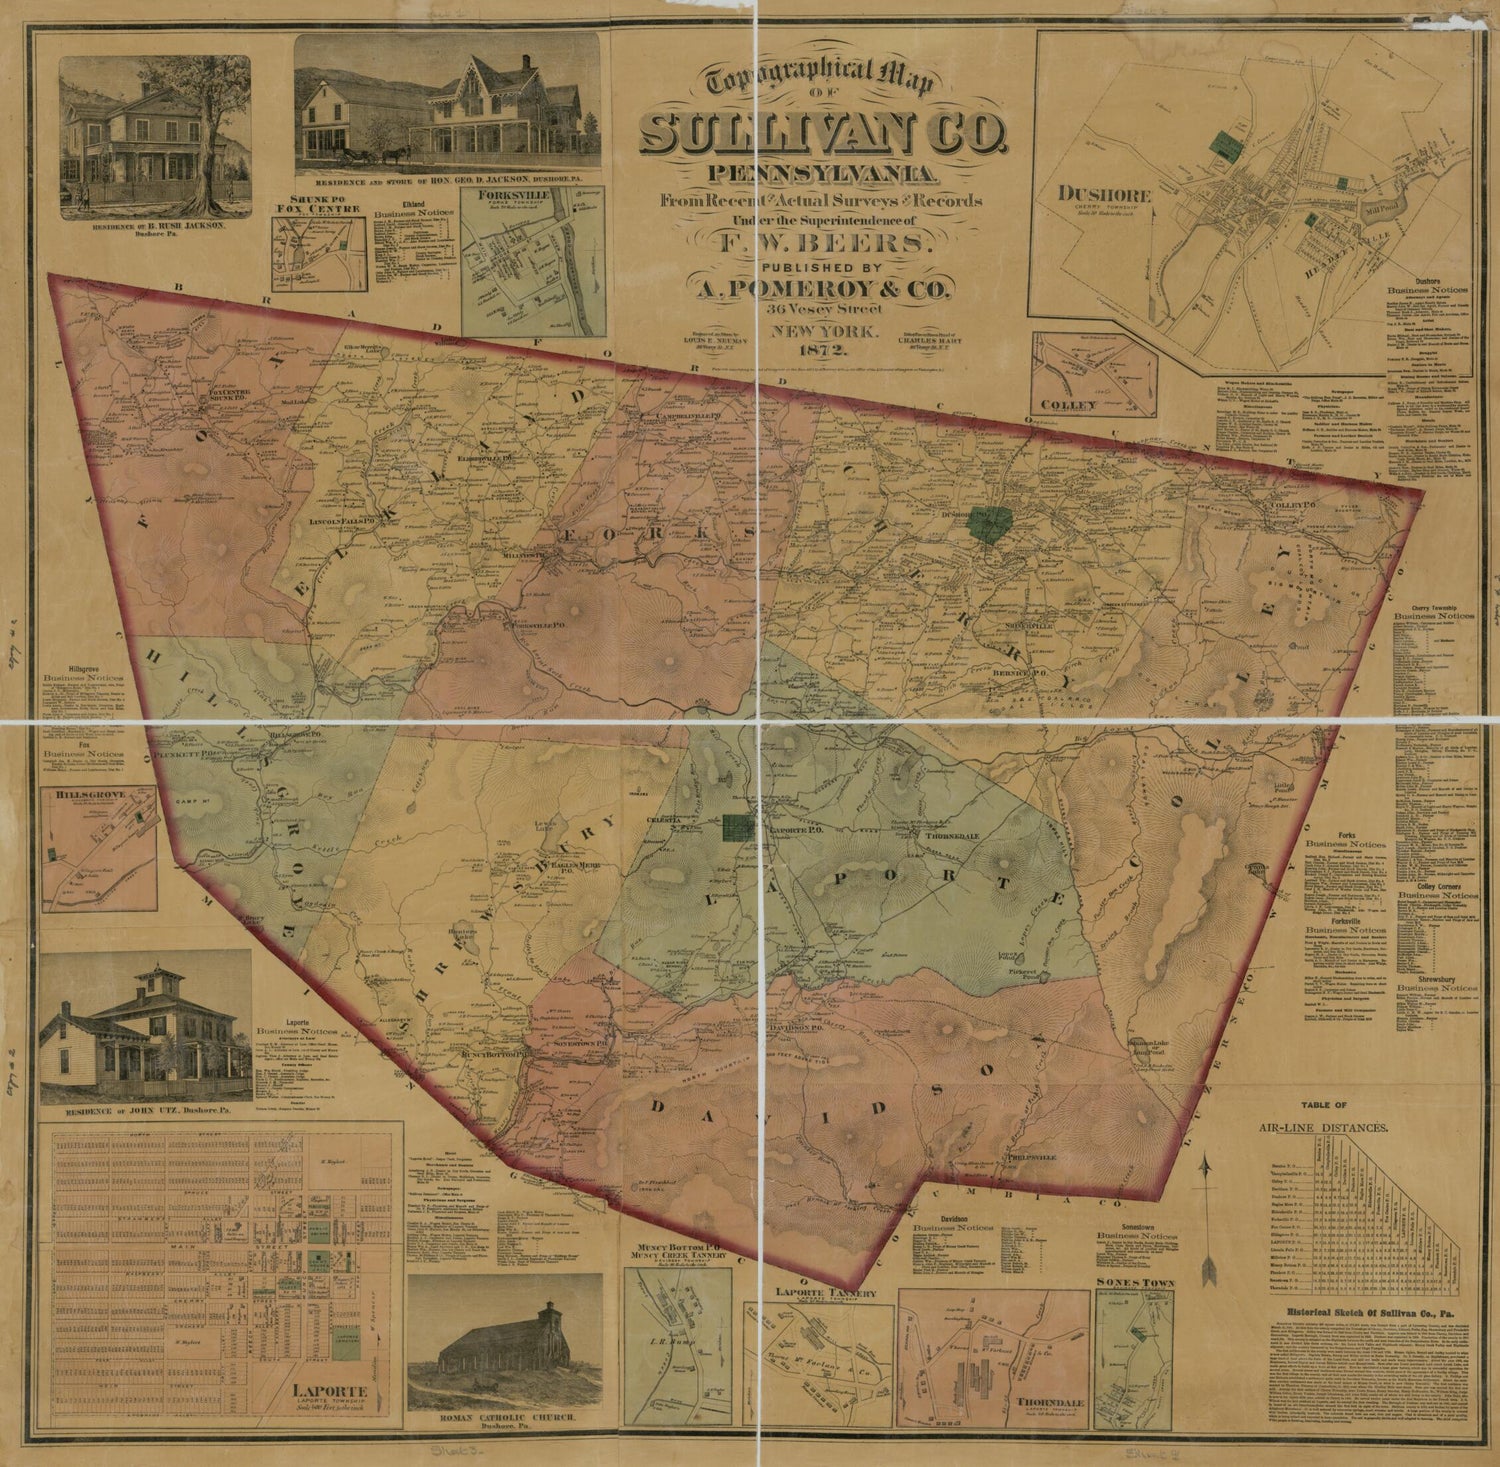 This old map of Topographical Map of Sullivan Co., Pennsylvania : from Recent and Actual Surveys and Records from 1872 was created by  A. Pomeroy &amp; Co, F. W. (Frederick W.) Beers, Chas. (Charles) Hart, Louis E. Neumann in 1872